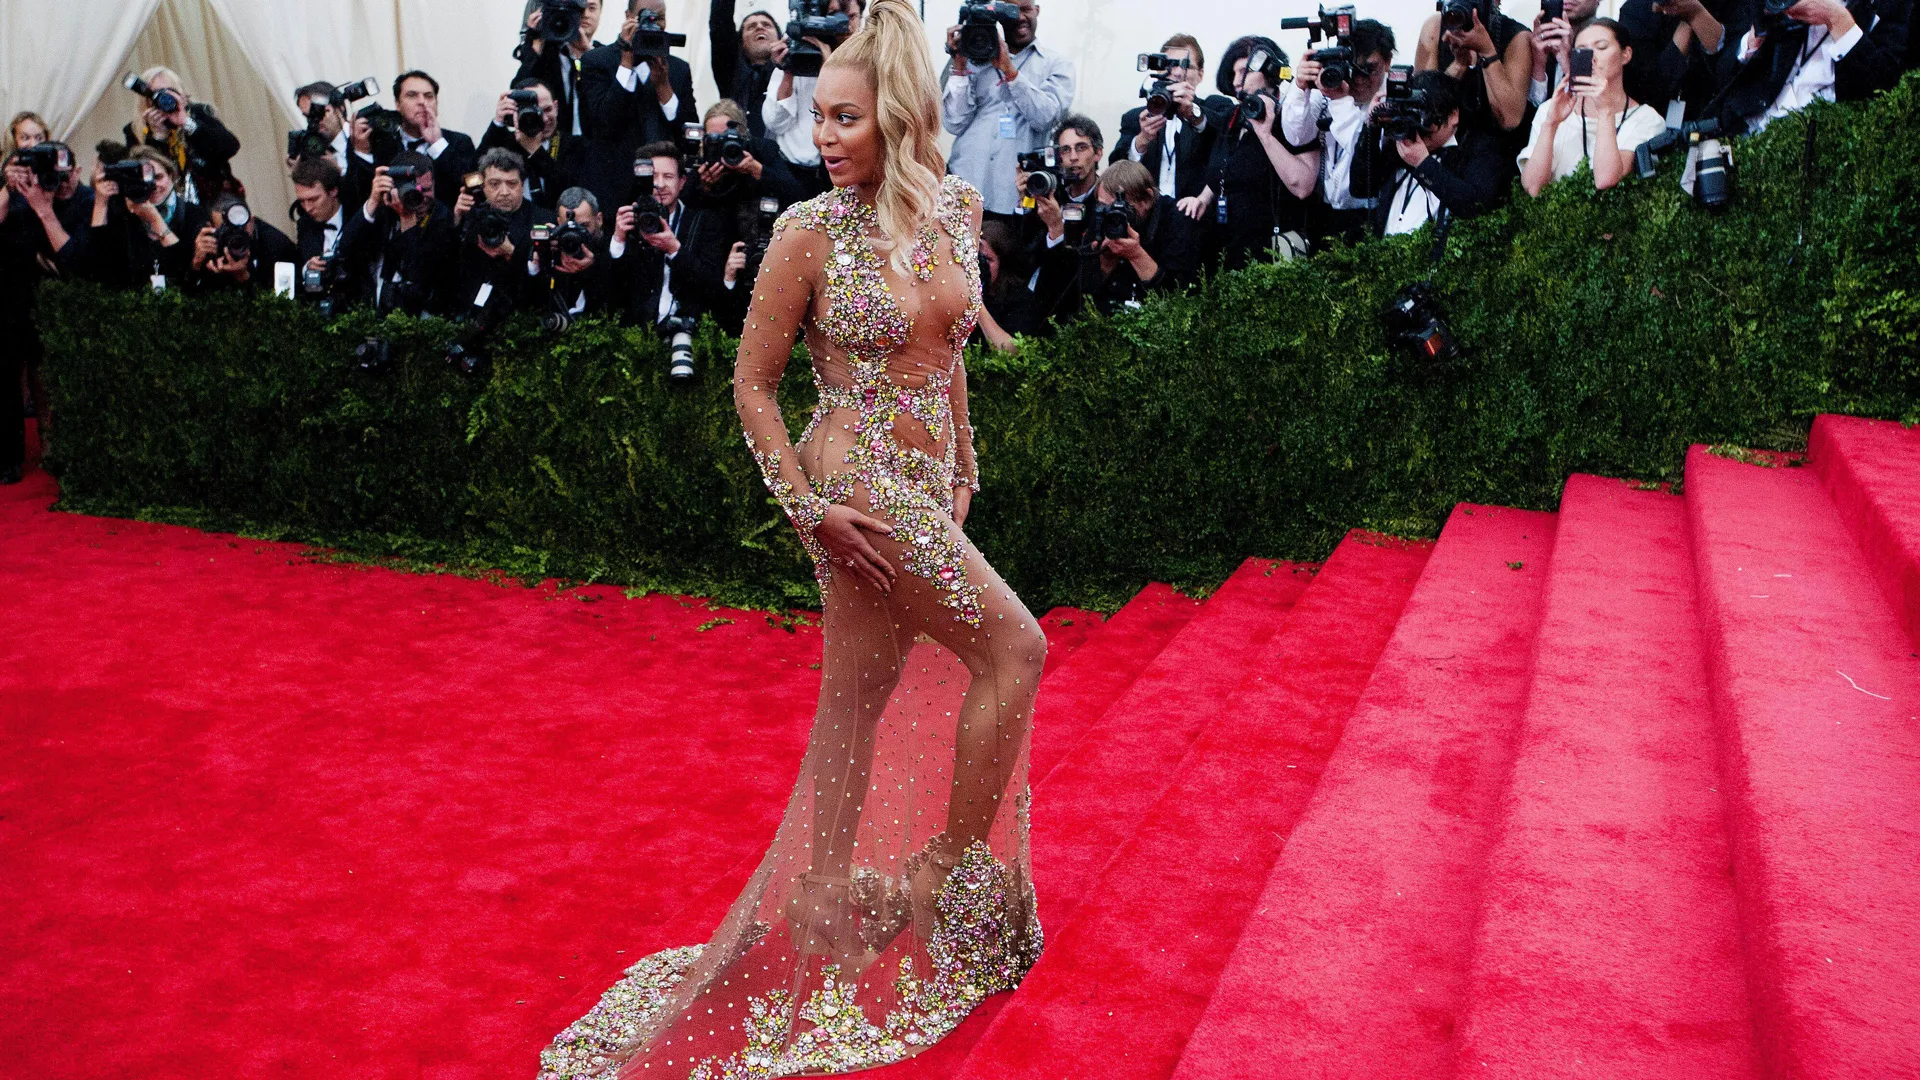 A photograph of Beyonce at the Met Gala in a rhinestone dress with blonde hair in a ponytail - behind her is a group of photographers